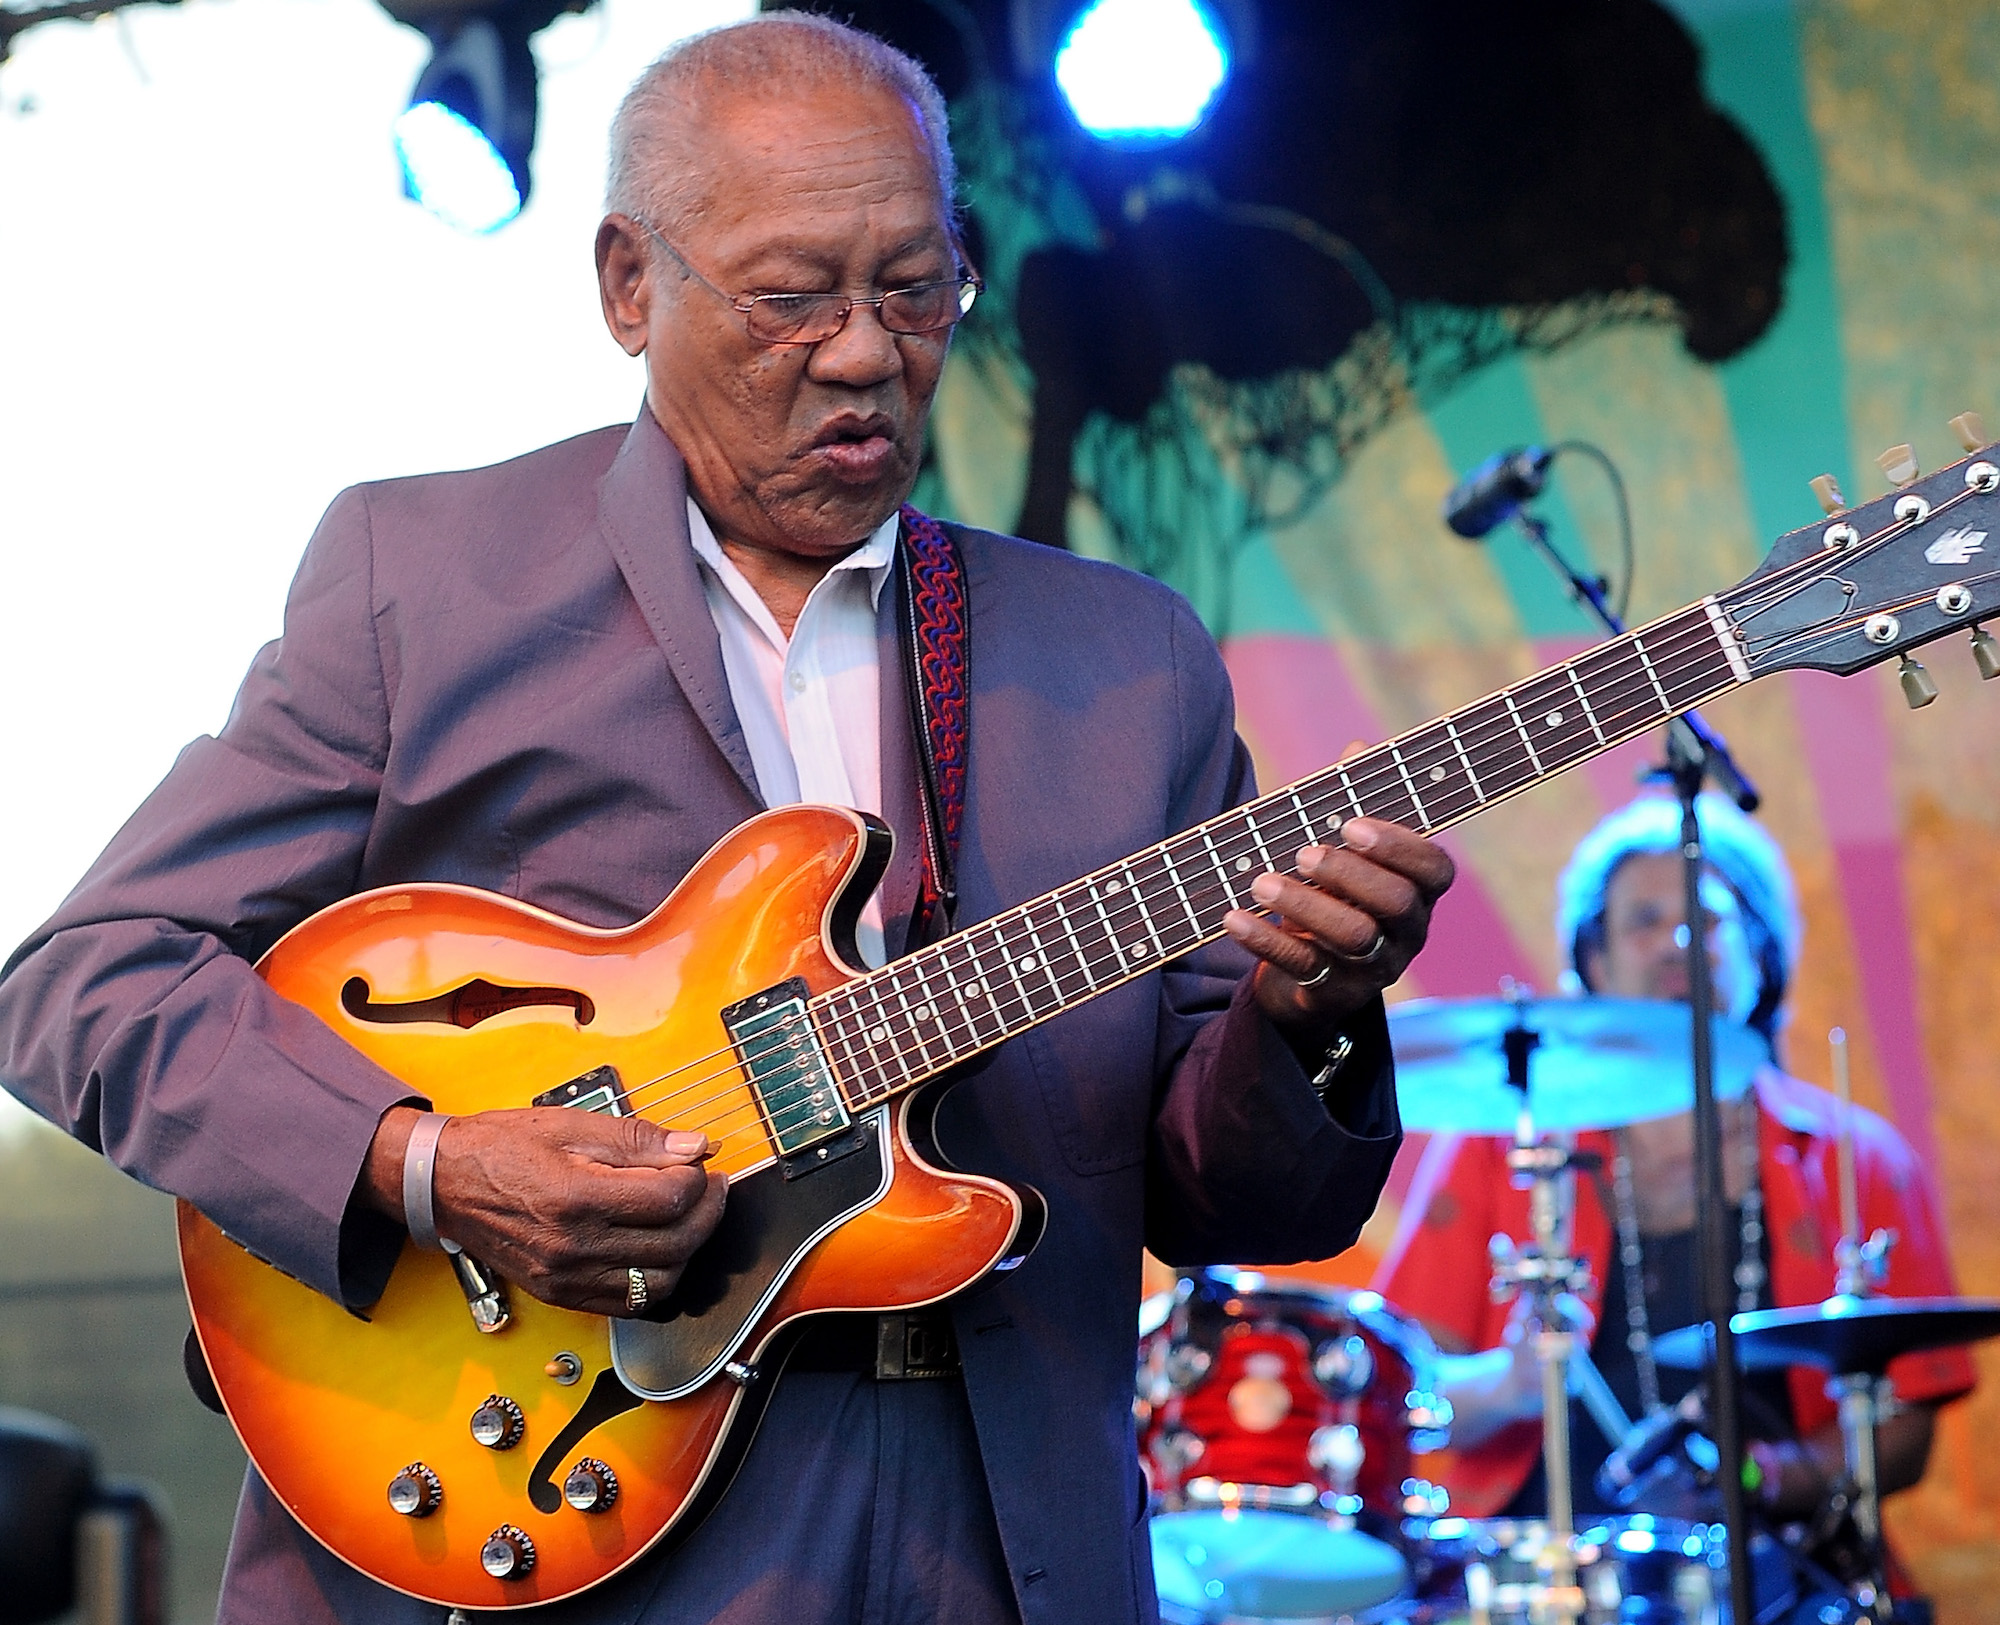 Ernest Ranglin performs onstage at the Plumas County Fairgrounds in Quincy, California on July 2, 2011